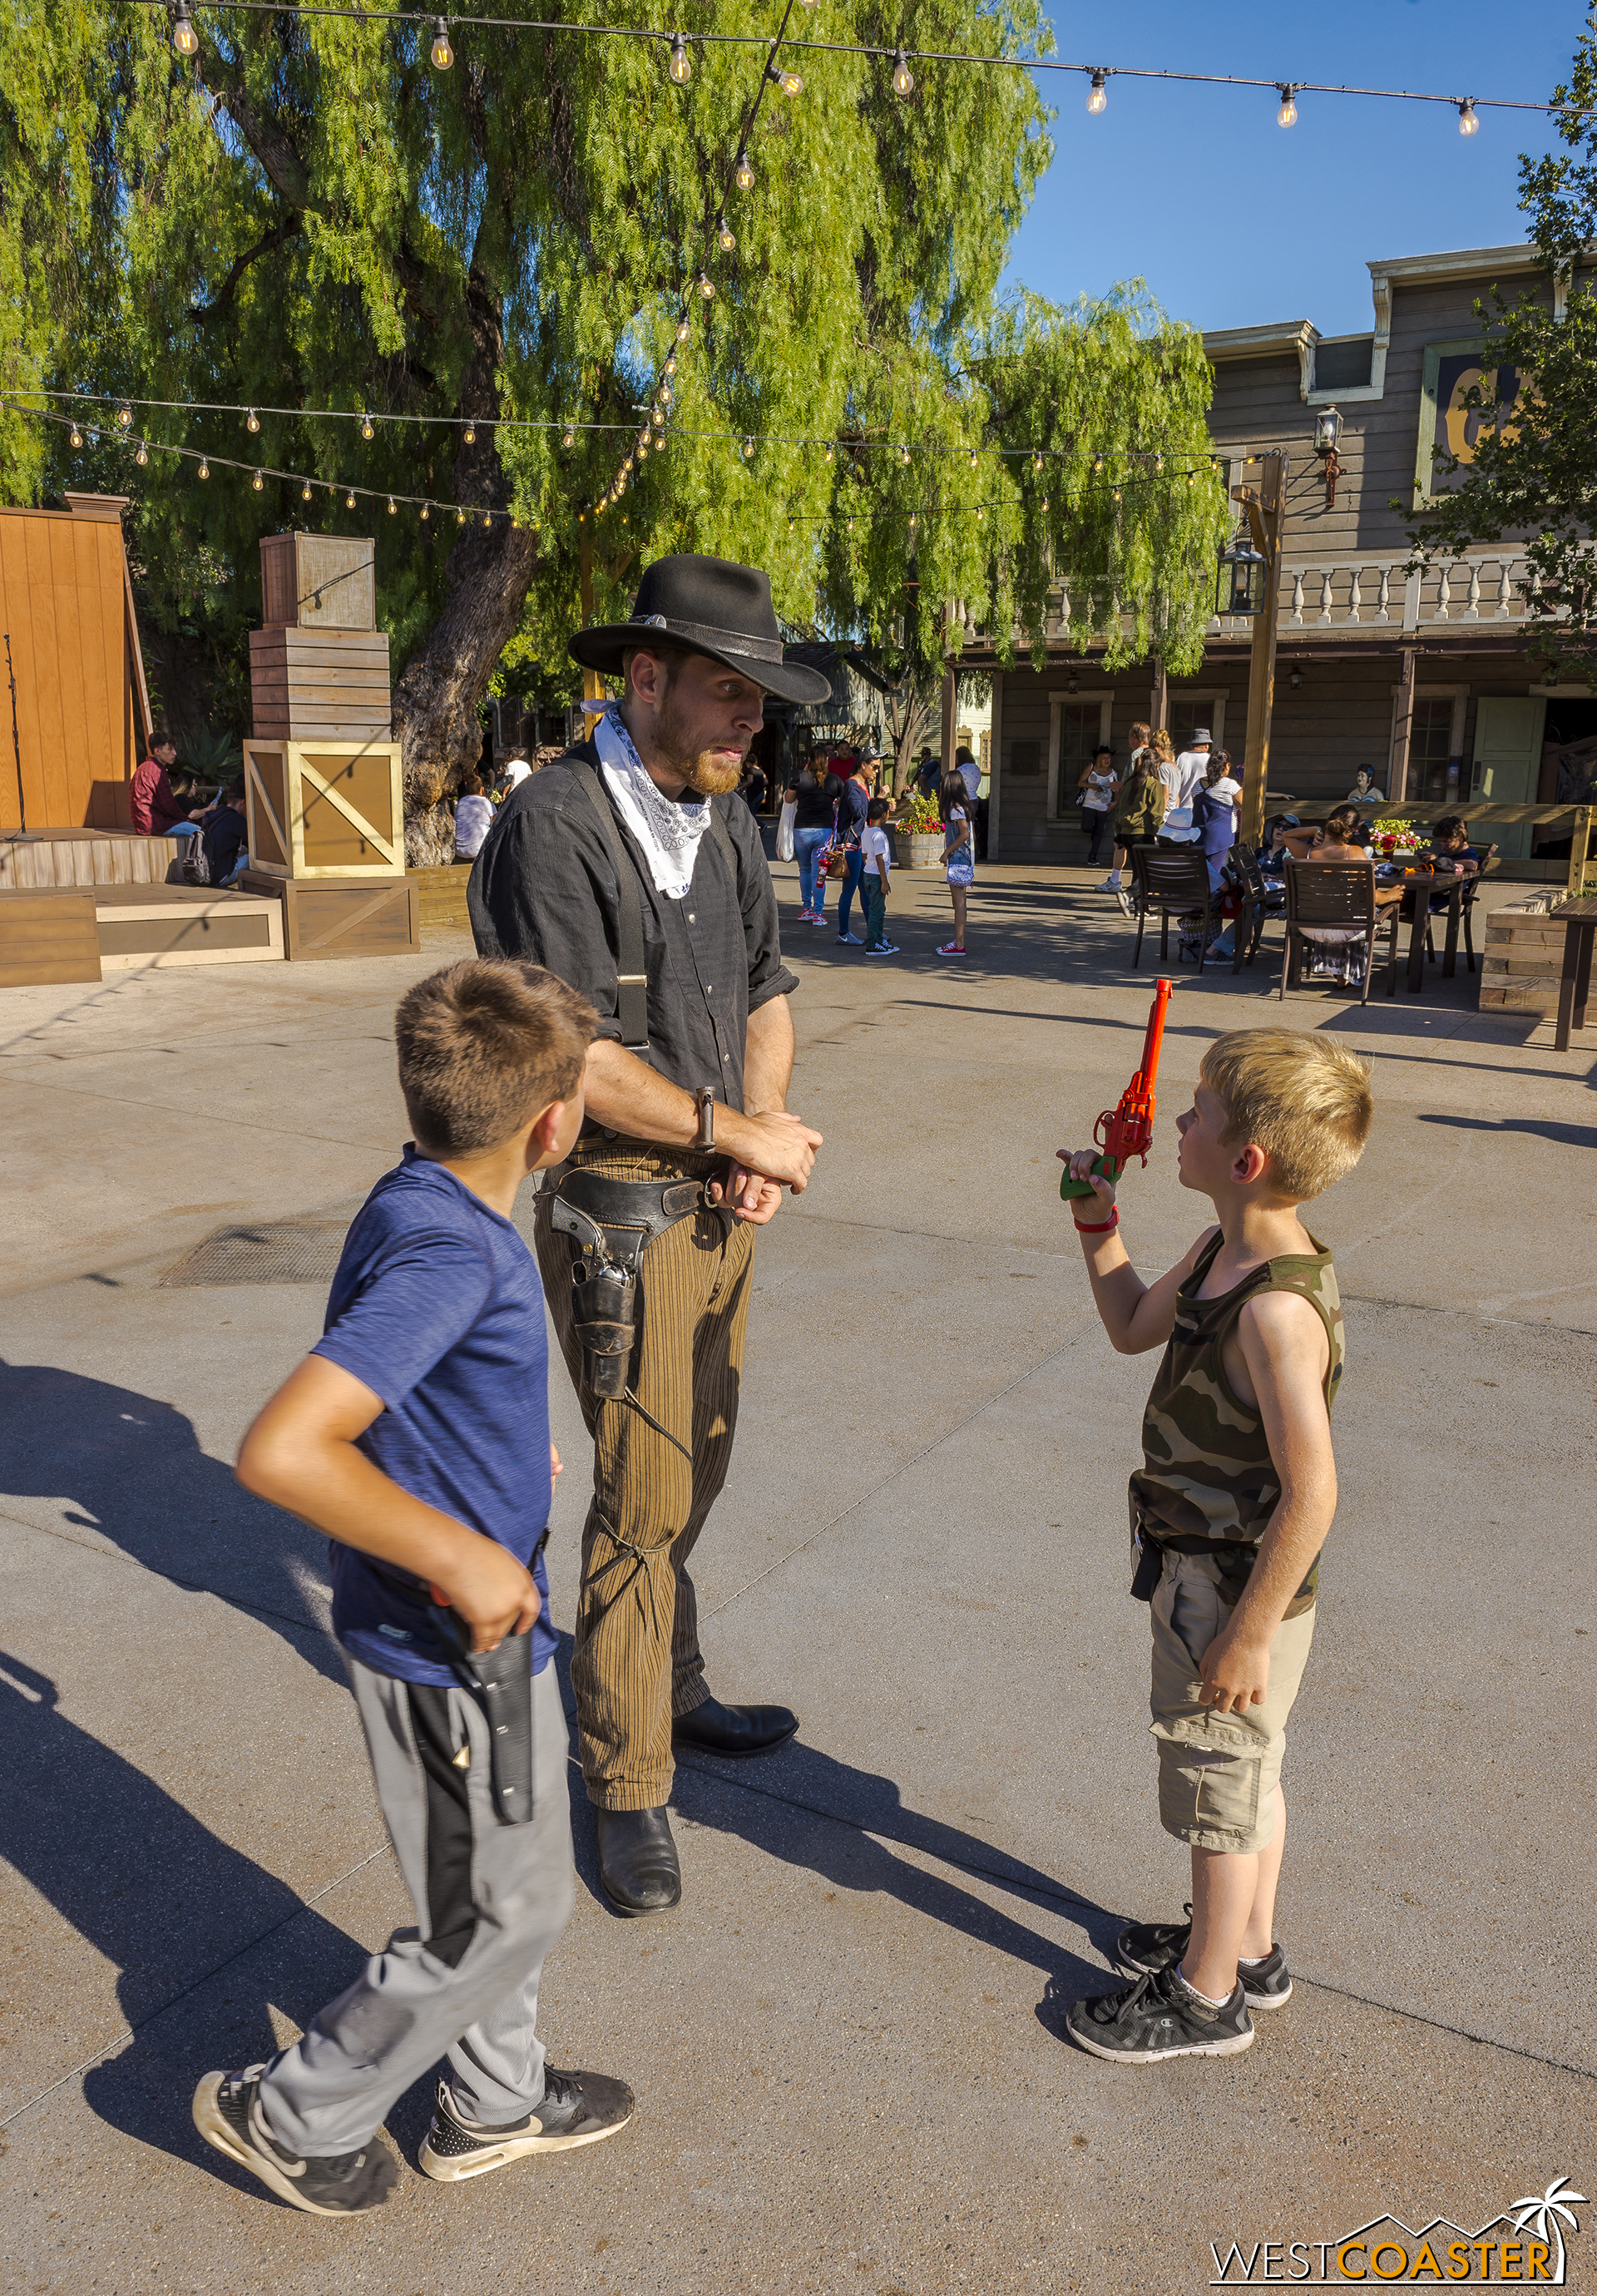  Many people agreed from last year's event and update--Ghost Town Alive! is one of, if not the best thing Knott's has put out in a very long time. 